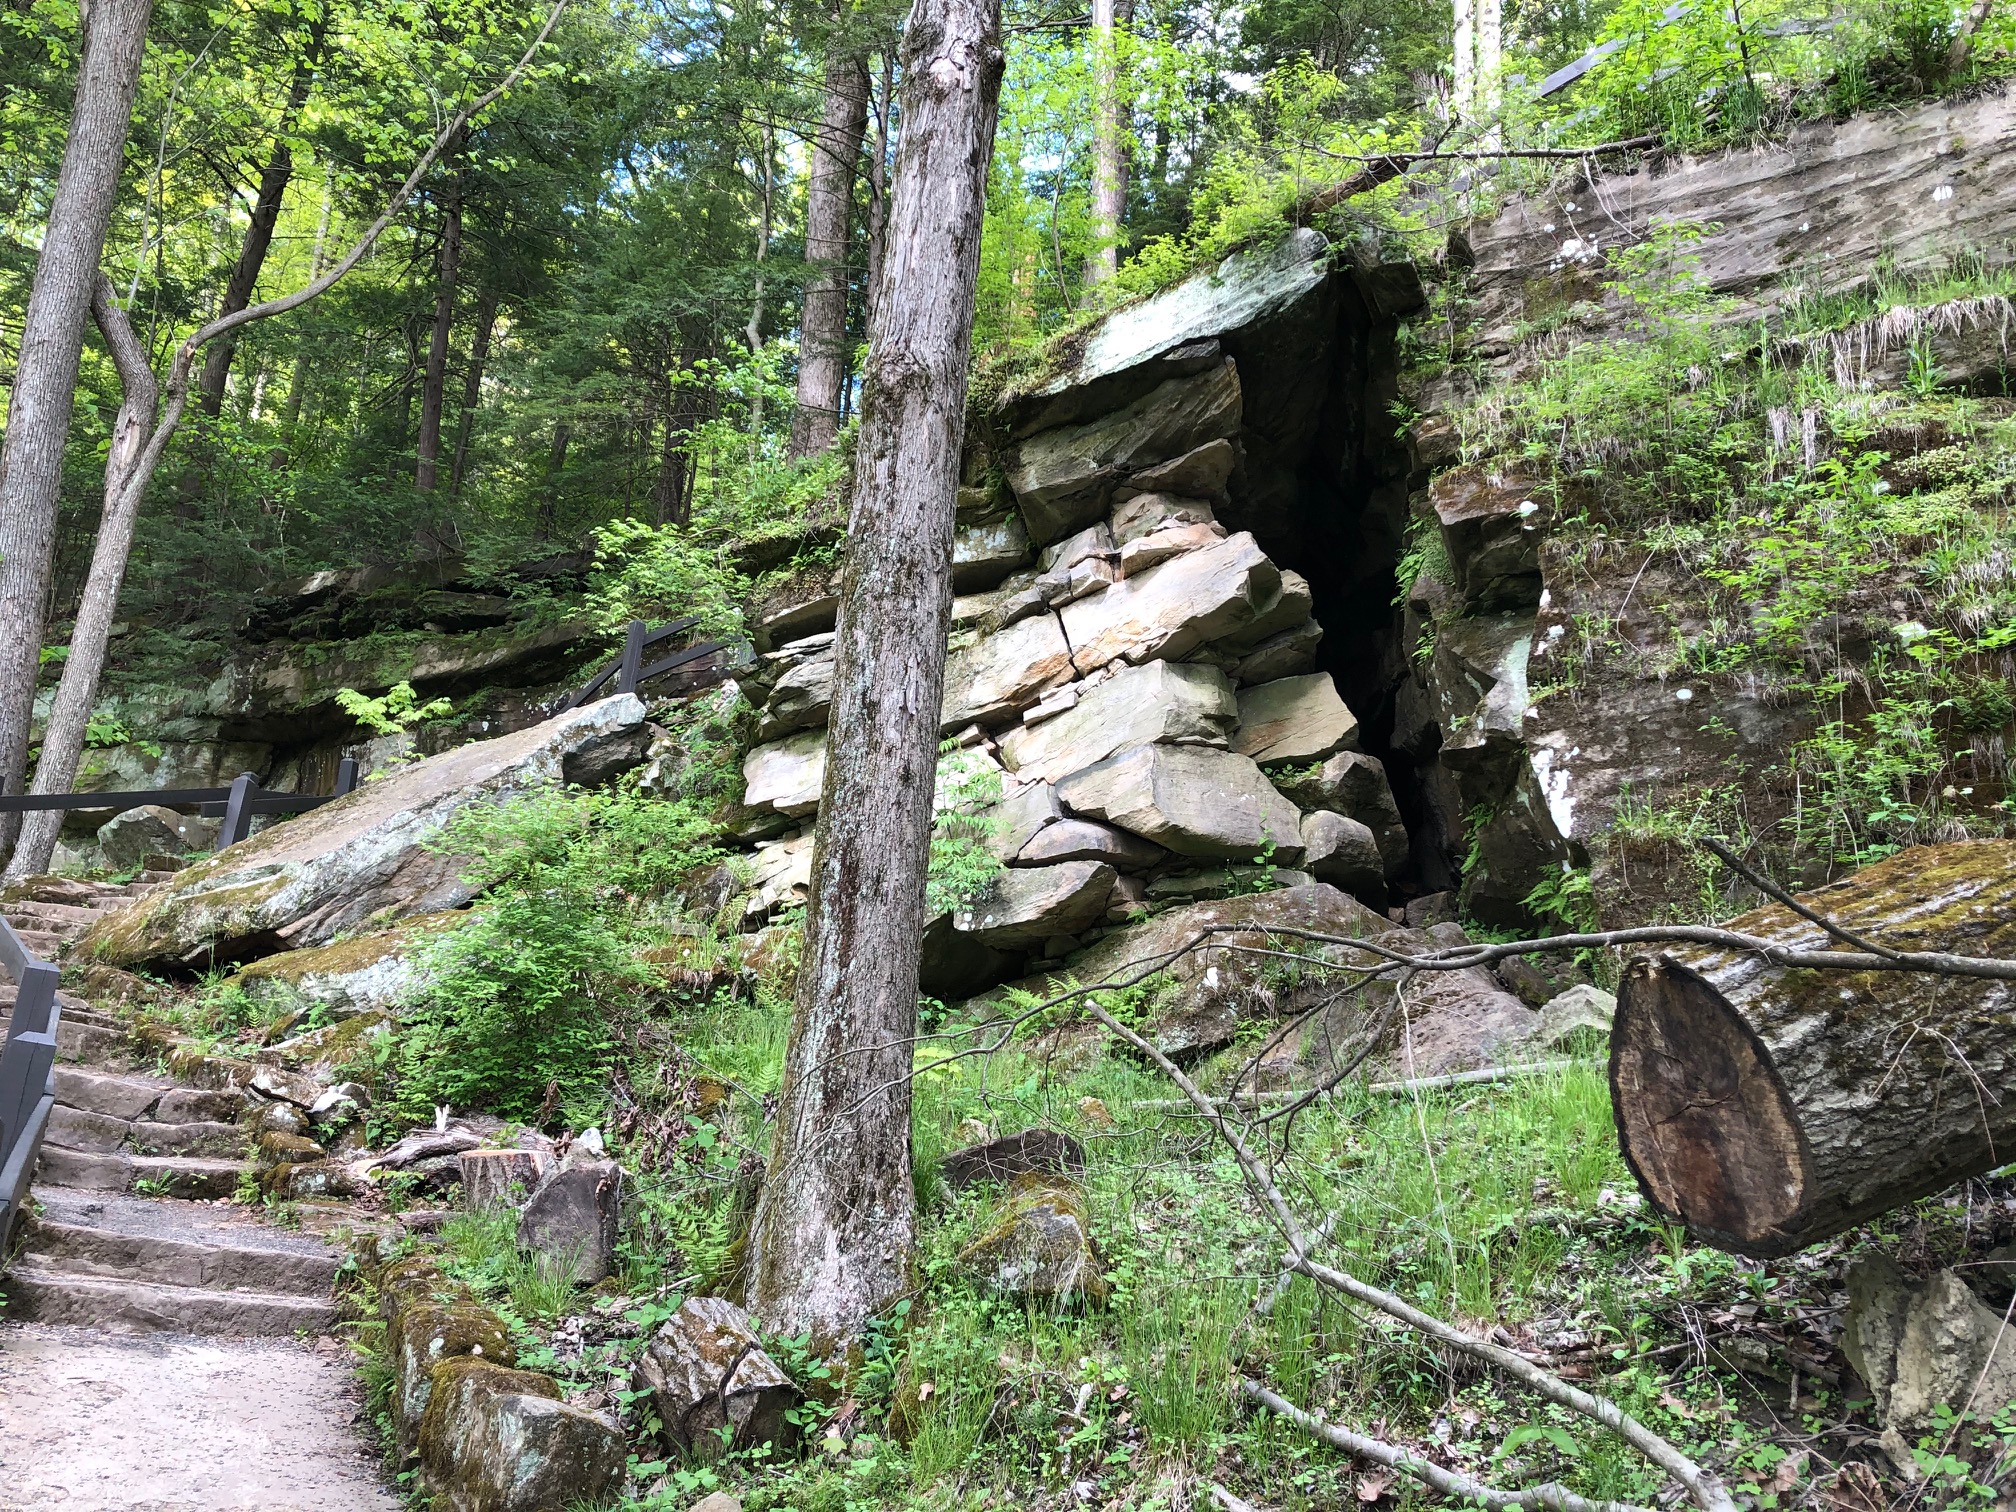 McConnells Mill StatePark is known for its beautiful scenery and rock formations. (photo: Christopher Maggio)